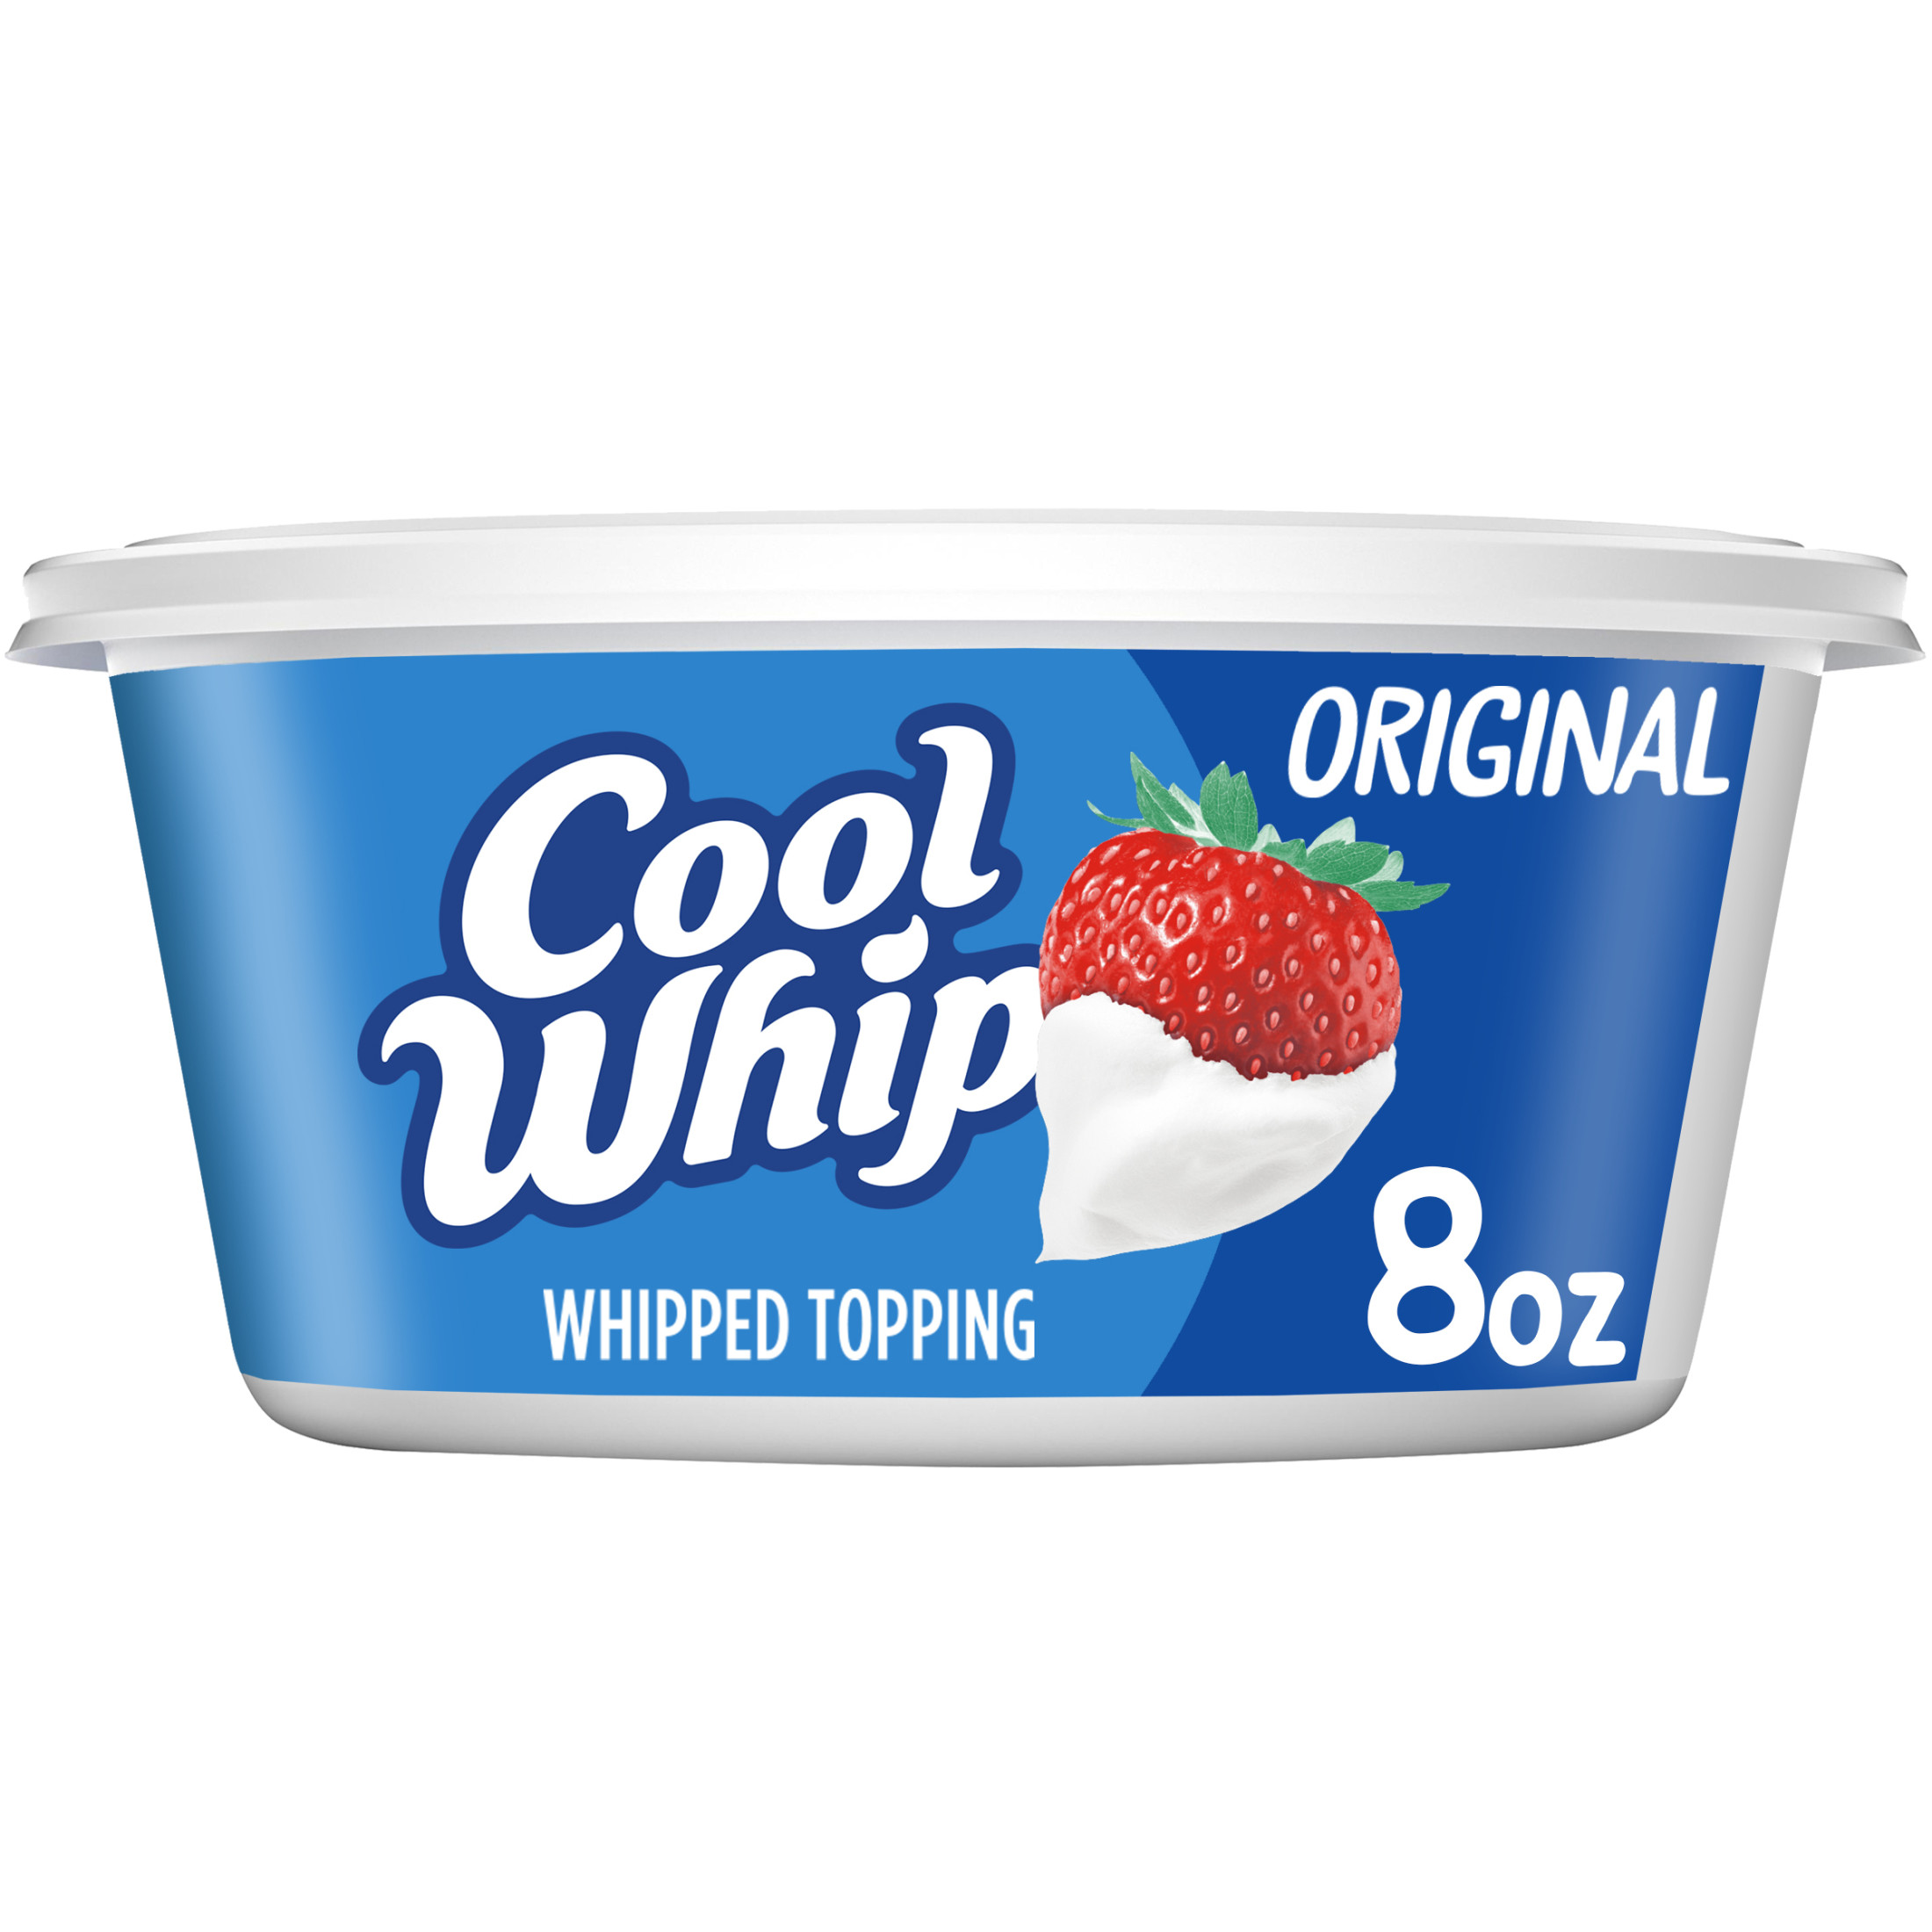 Cool Whip Original Whipped Cream Topping, 8 oz Tub - image 1 of 13